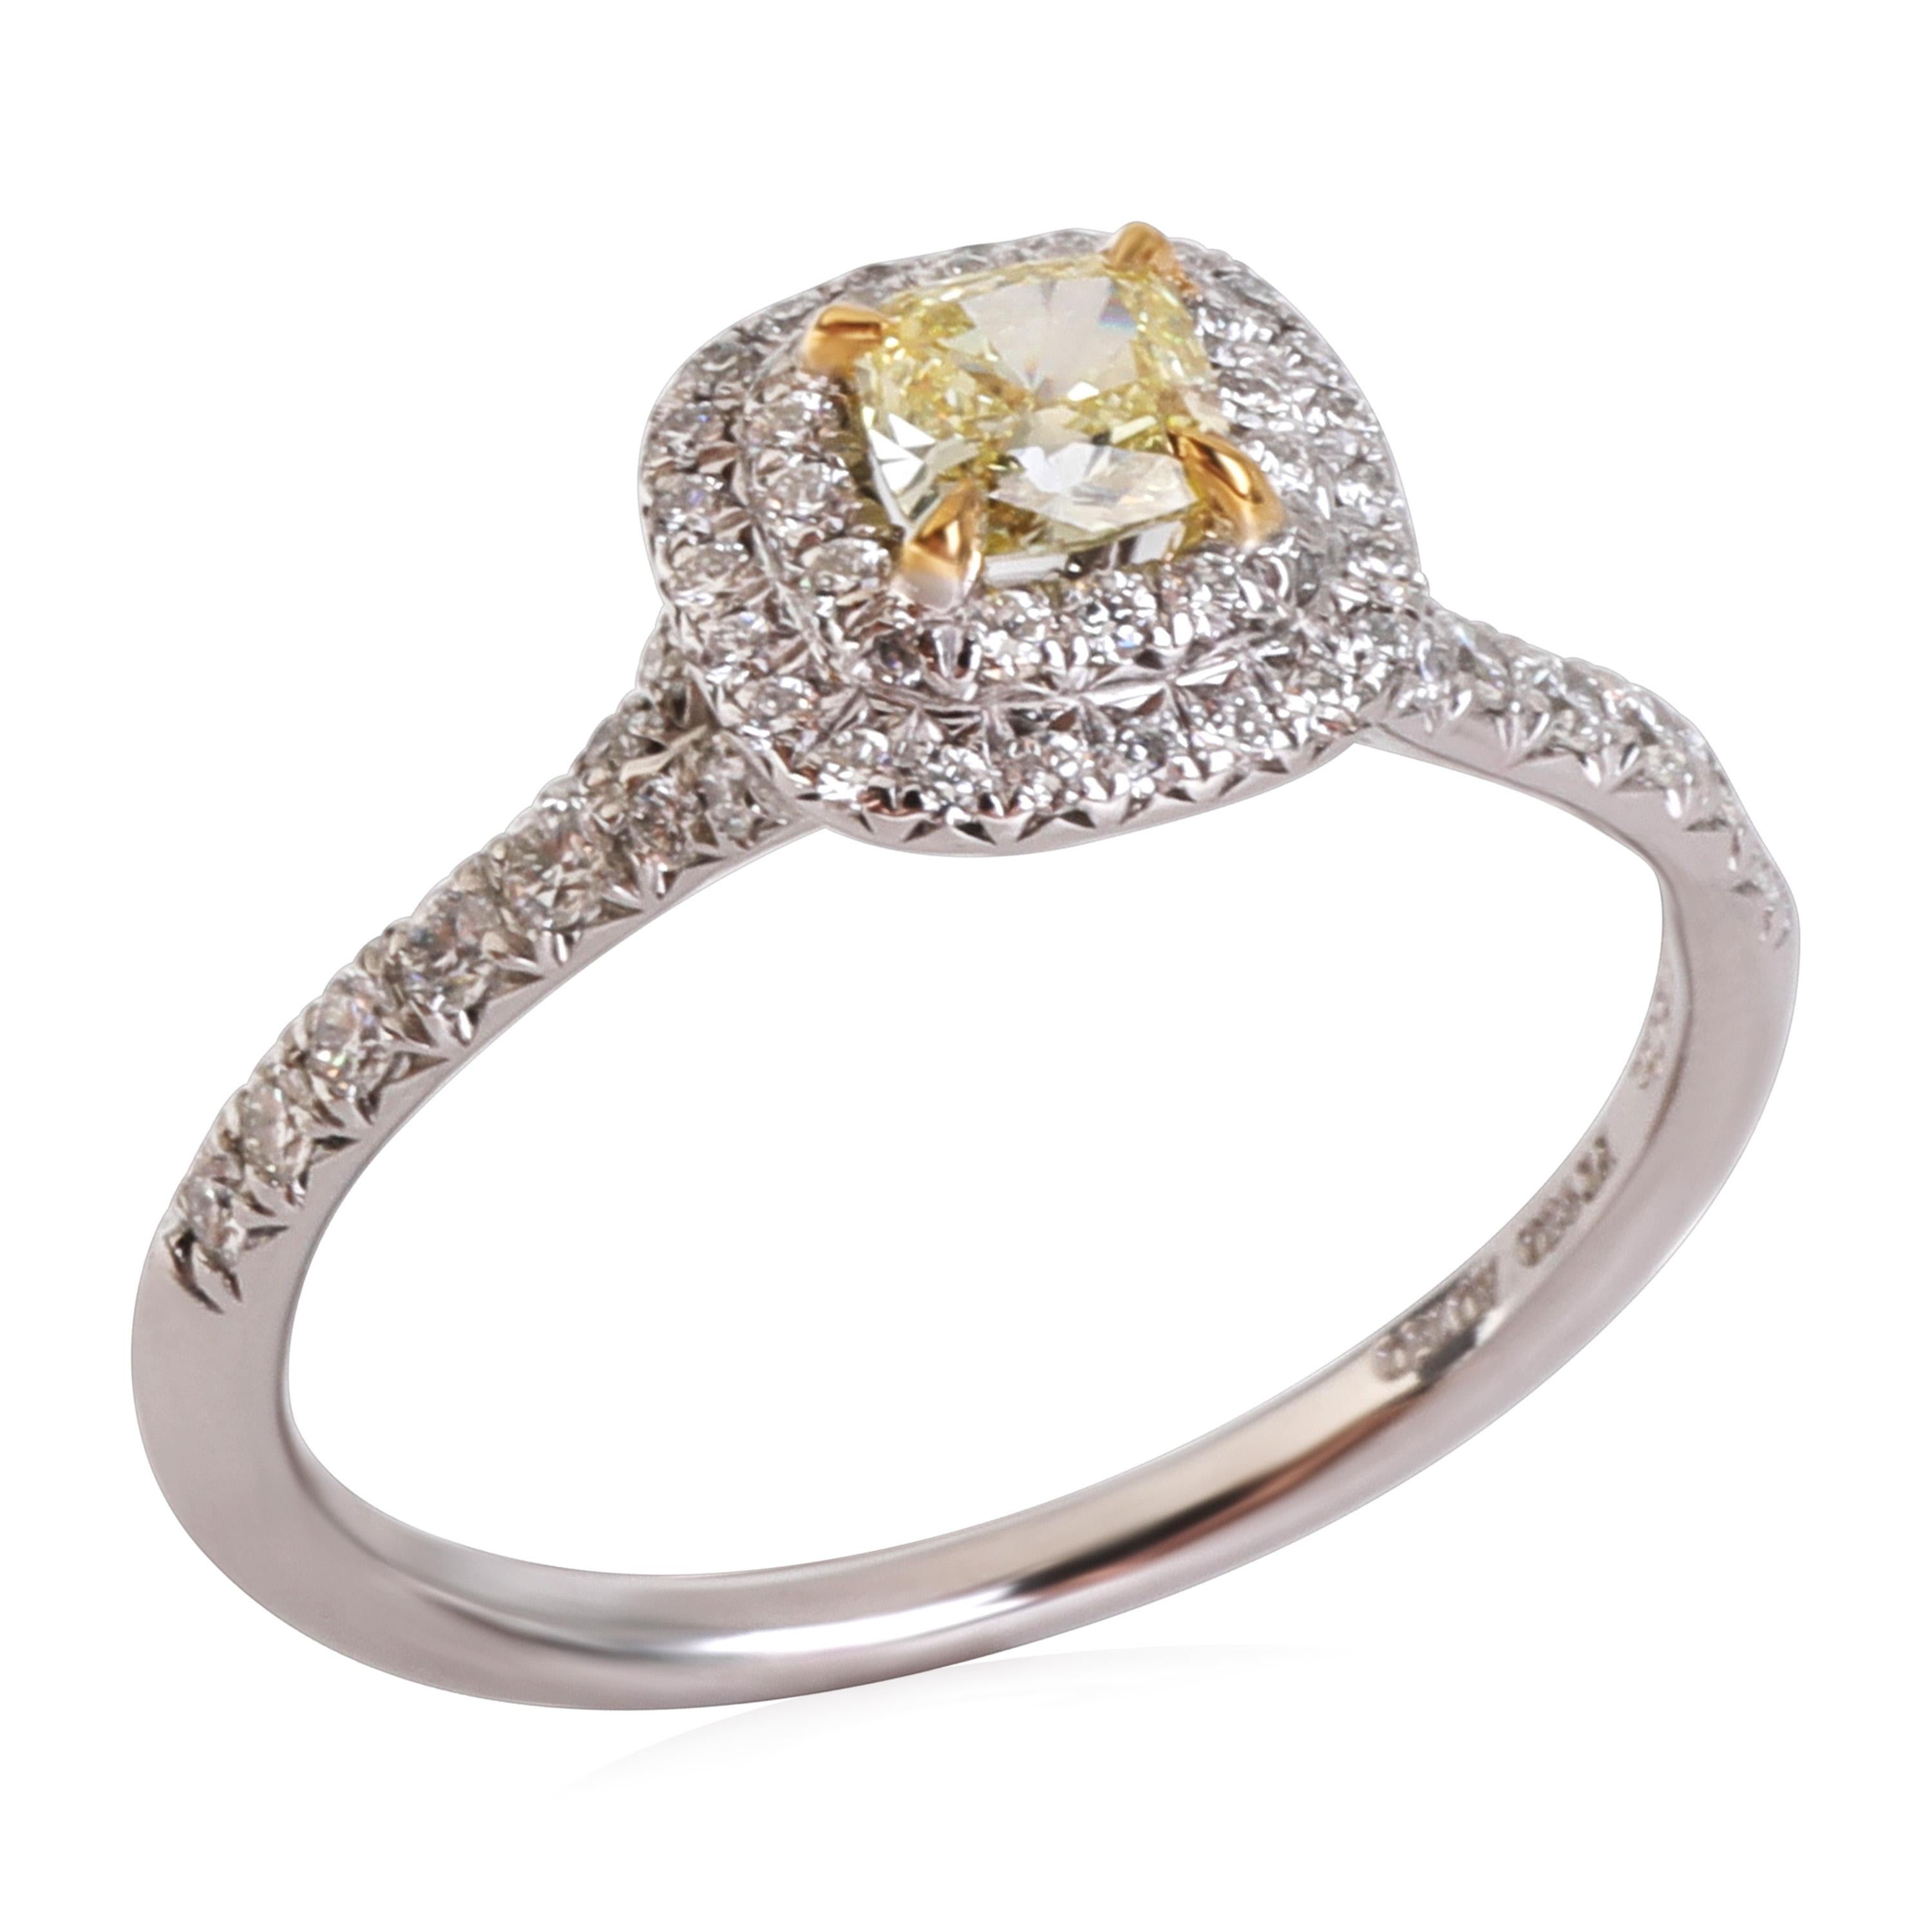 Tiffany & Co. Soleste Fancy Yellow Diamond Engagement Ring in Platinum 0.56 ctw

PRIMARY DETAILS
SKU: 120080
Listing Title: Tiffany & Co. Soleste Fancy Yellow Diamond Engagement Ring in Platinum 0.56 ctw
Condition Description: Retails for 5900 USD.